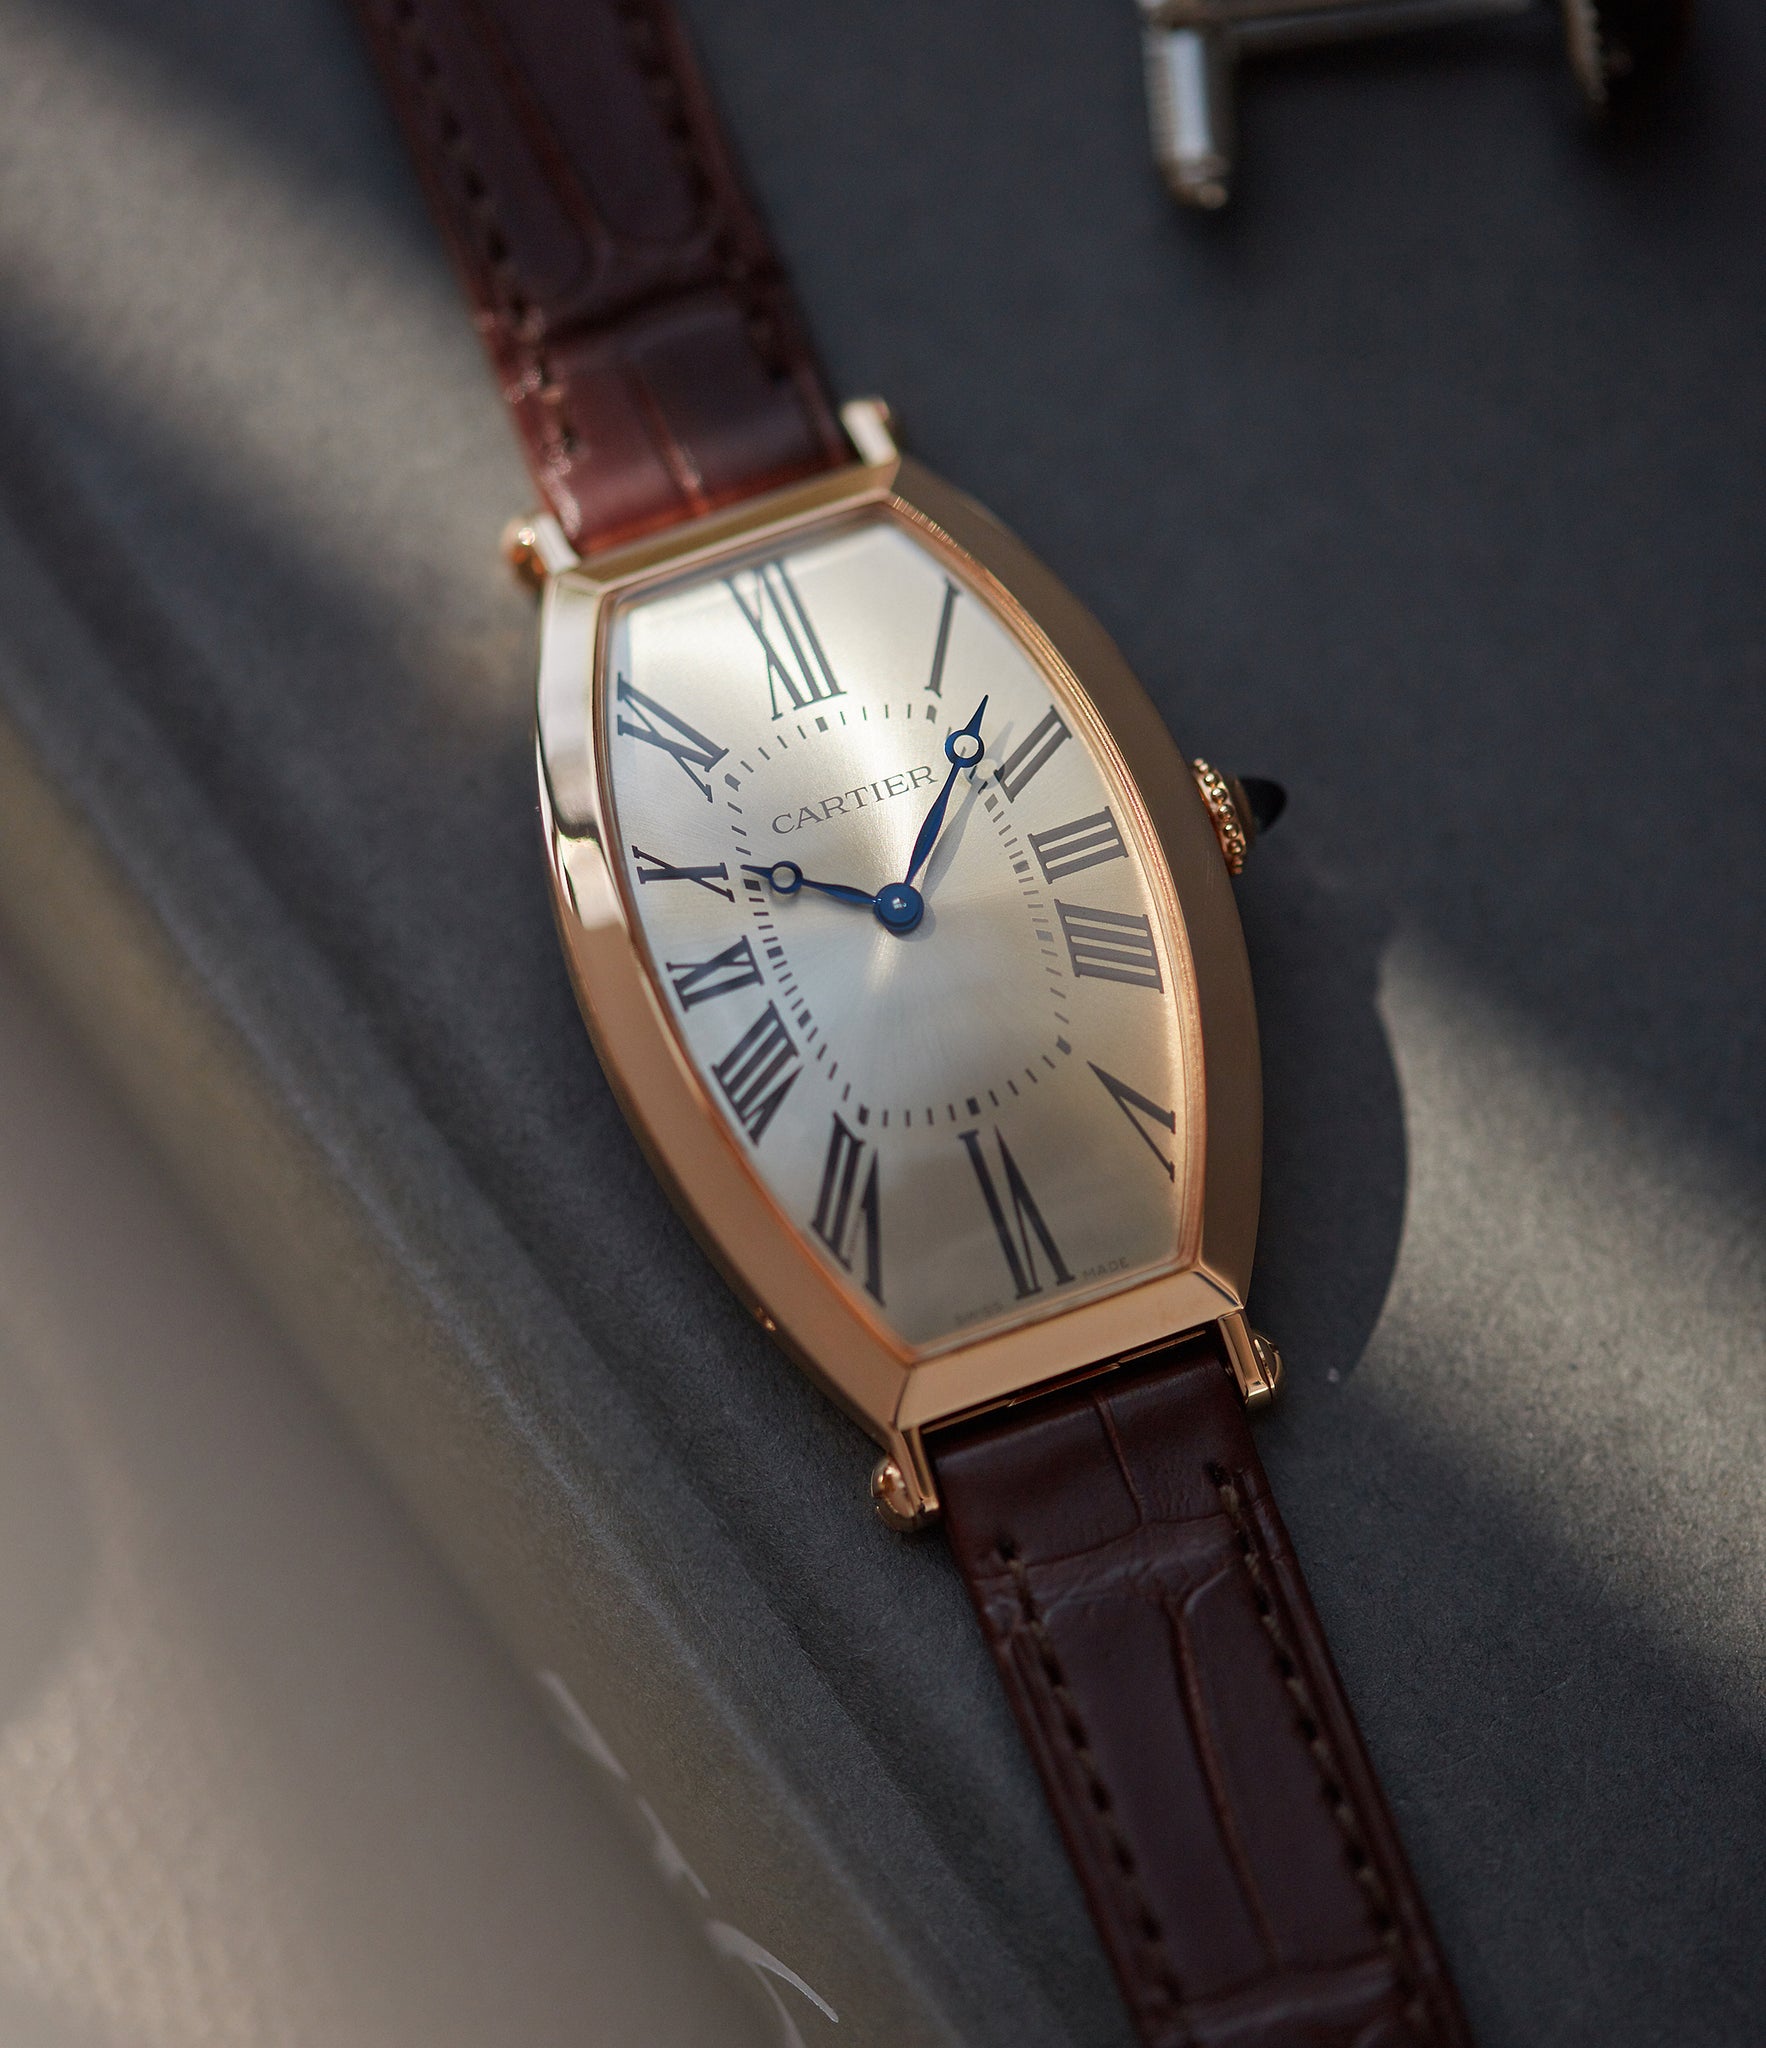 rare Cartier Montre Tonneau rose gold time-only luxury rare dress watch for sale online at A Collected Man London